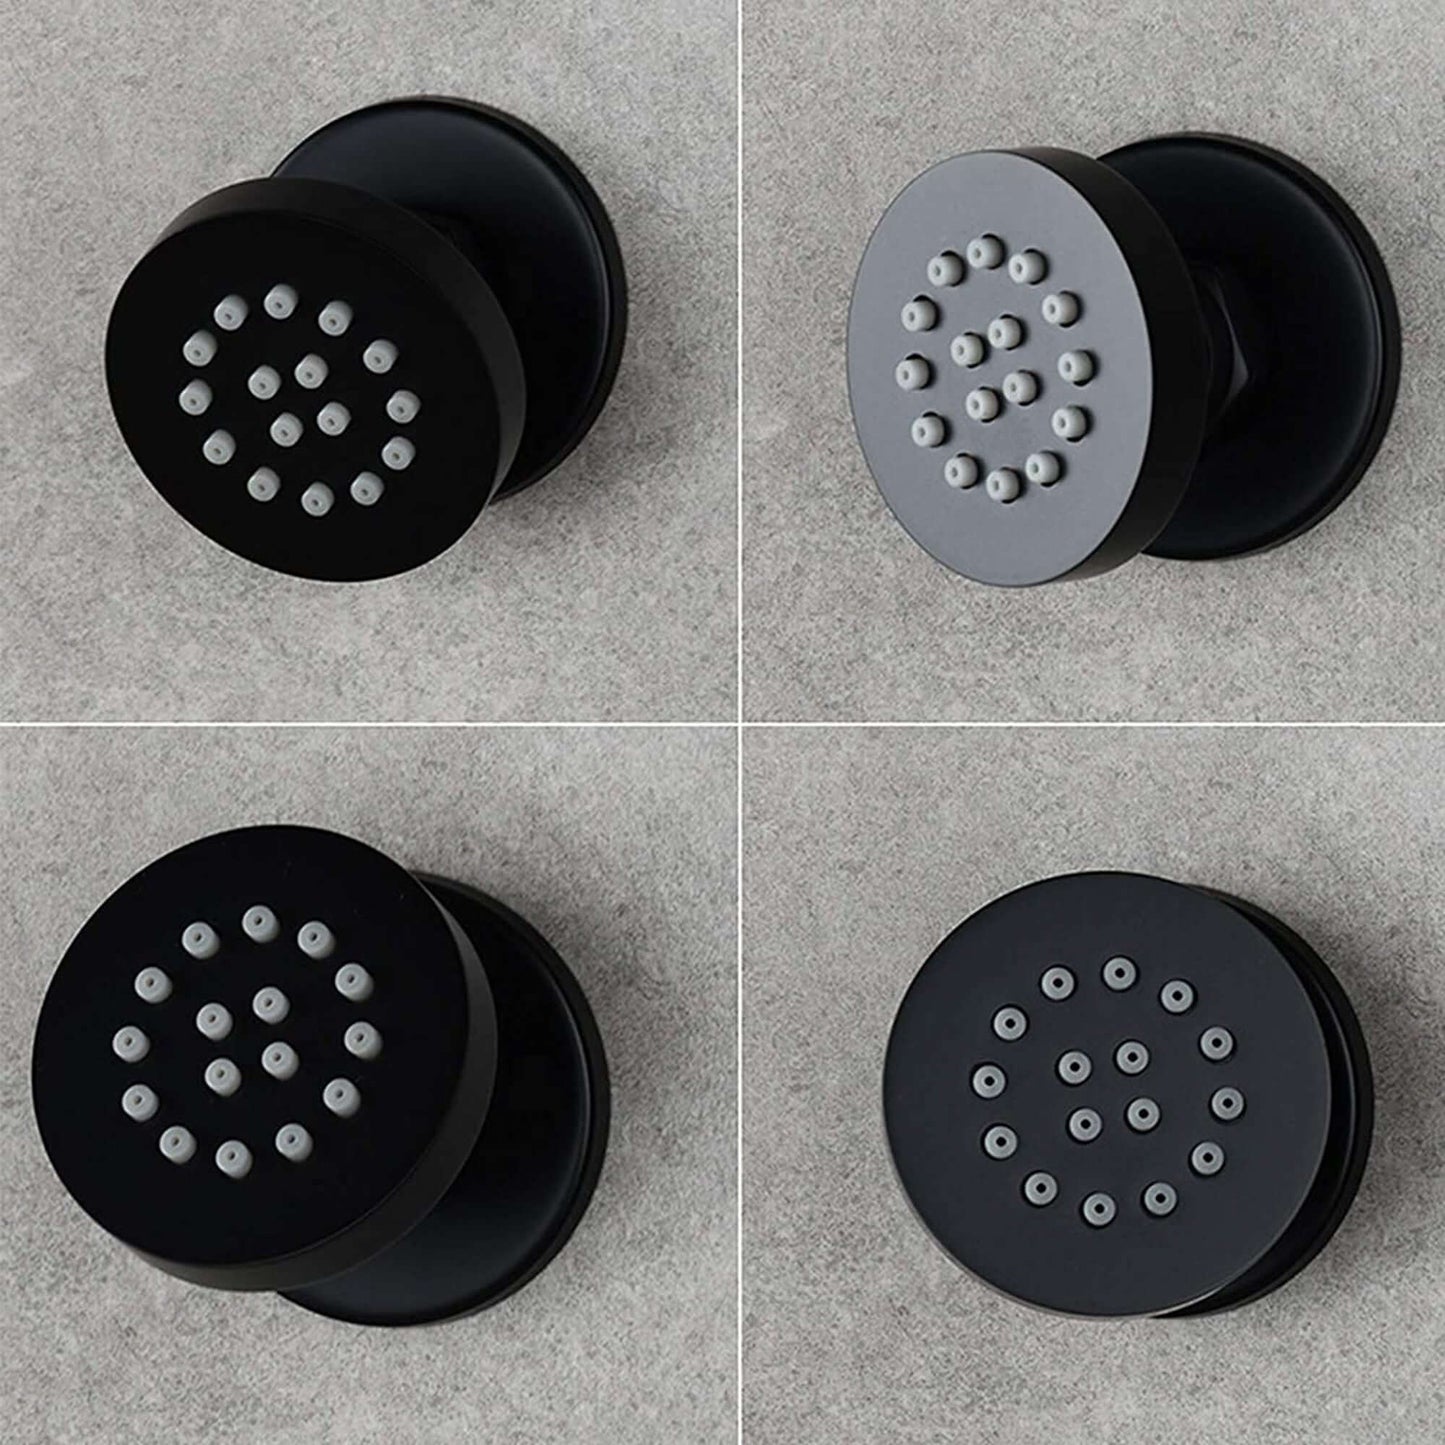 Venice Contemporary Round Concealed Thermostatic Shower Set Incl. Triple Valve, Wall Fixed 8" Shower Head, 4 Spa Body Jets - Black (2 Outlet)